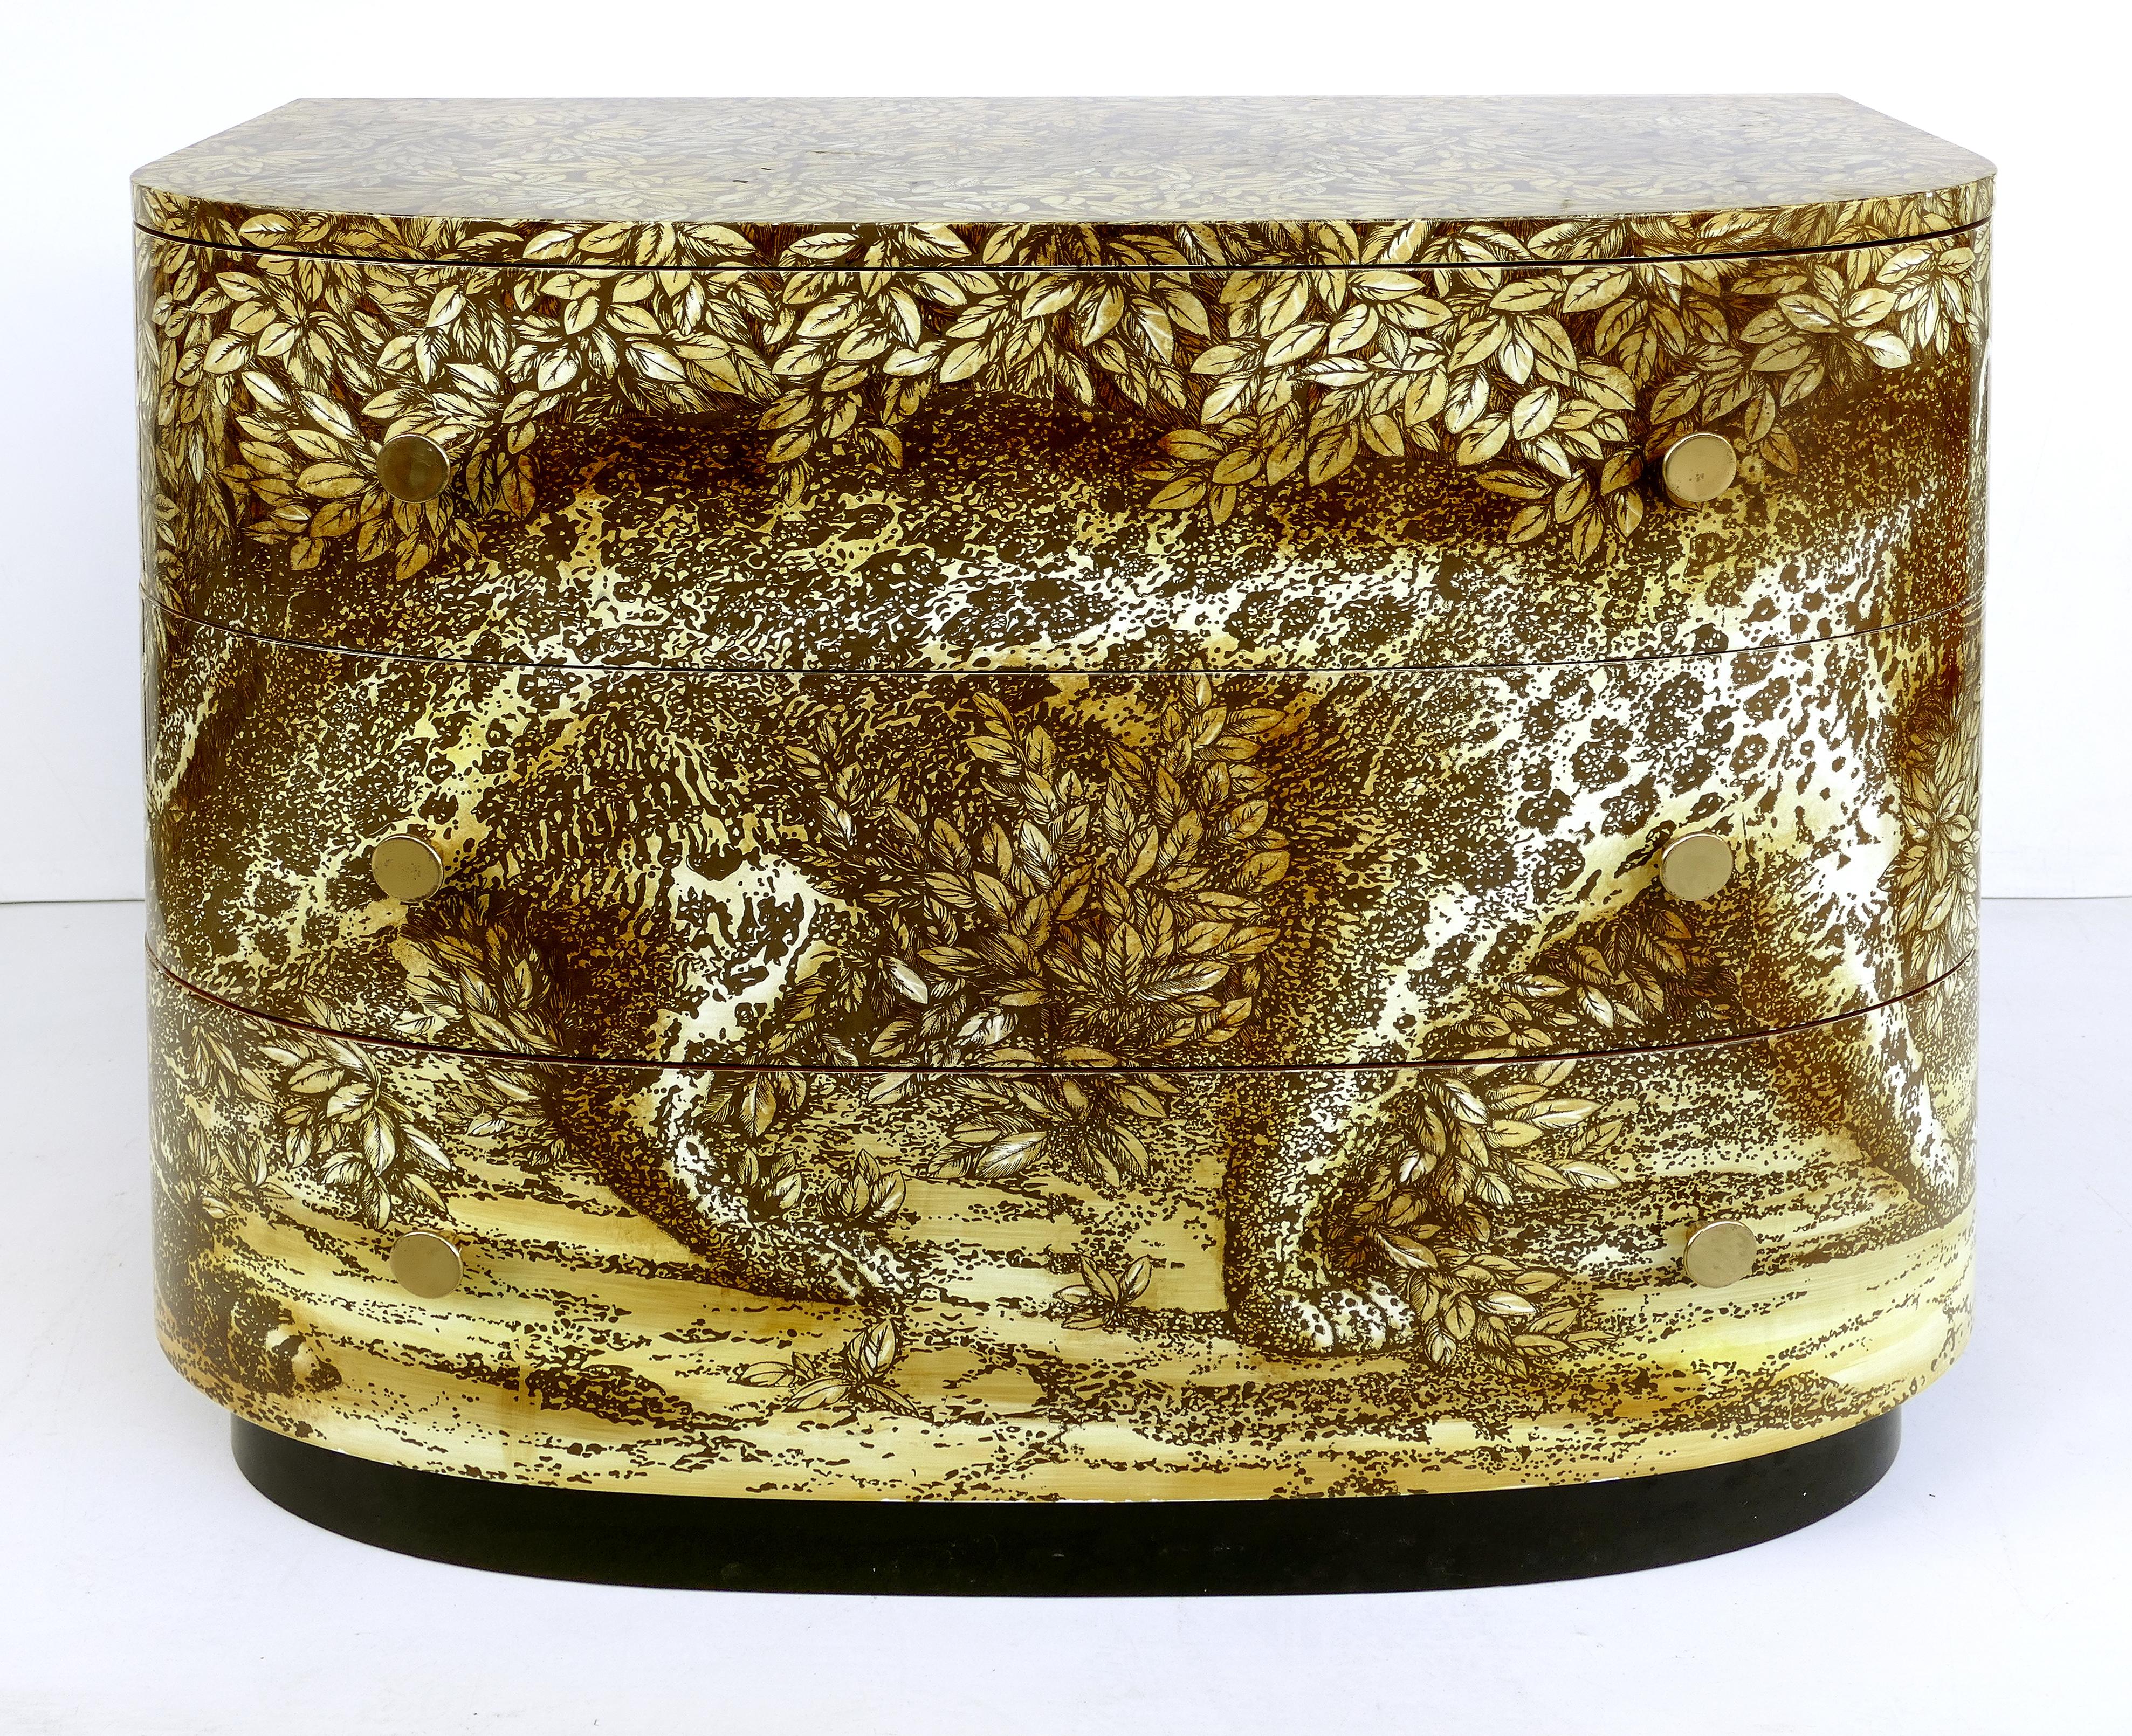 Piero Fornasetti leopard chest of drawers, Leopardo, Fornasetti Milano

Offered for sale is a three drawer chest of drawers designed by Piero Fornasetti (1913-1988) for Ateliers Fornasetti Milano.
The 